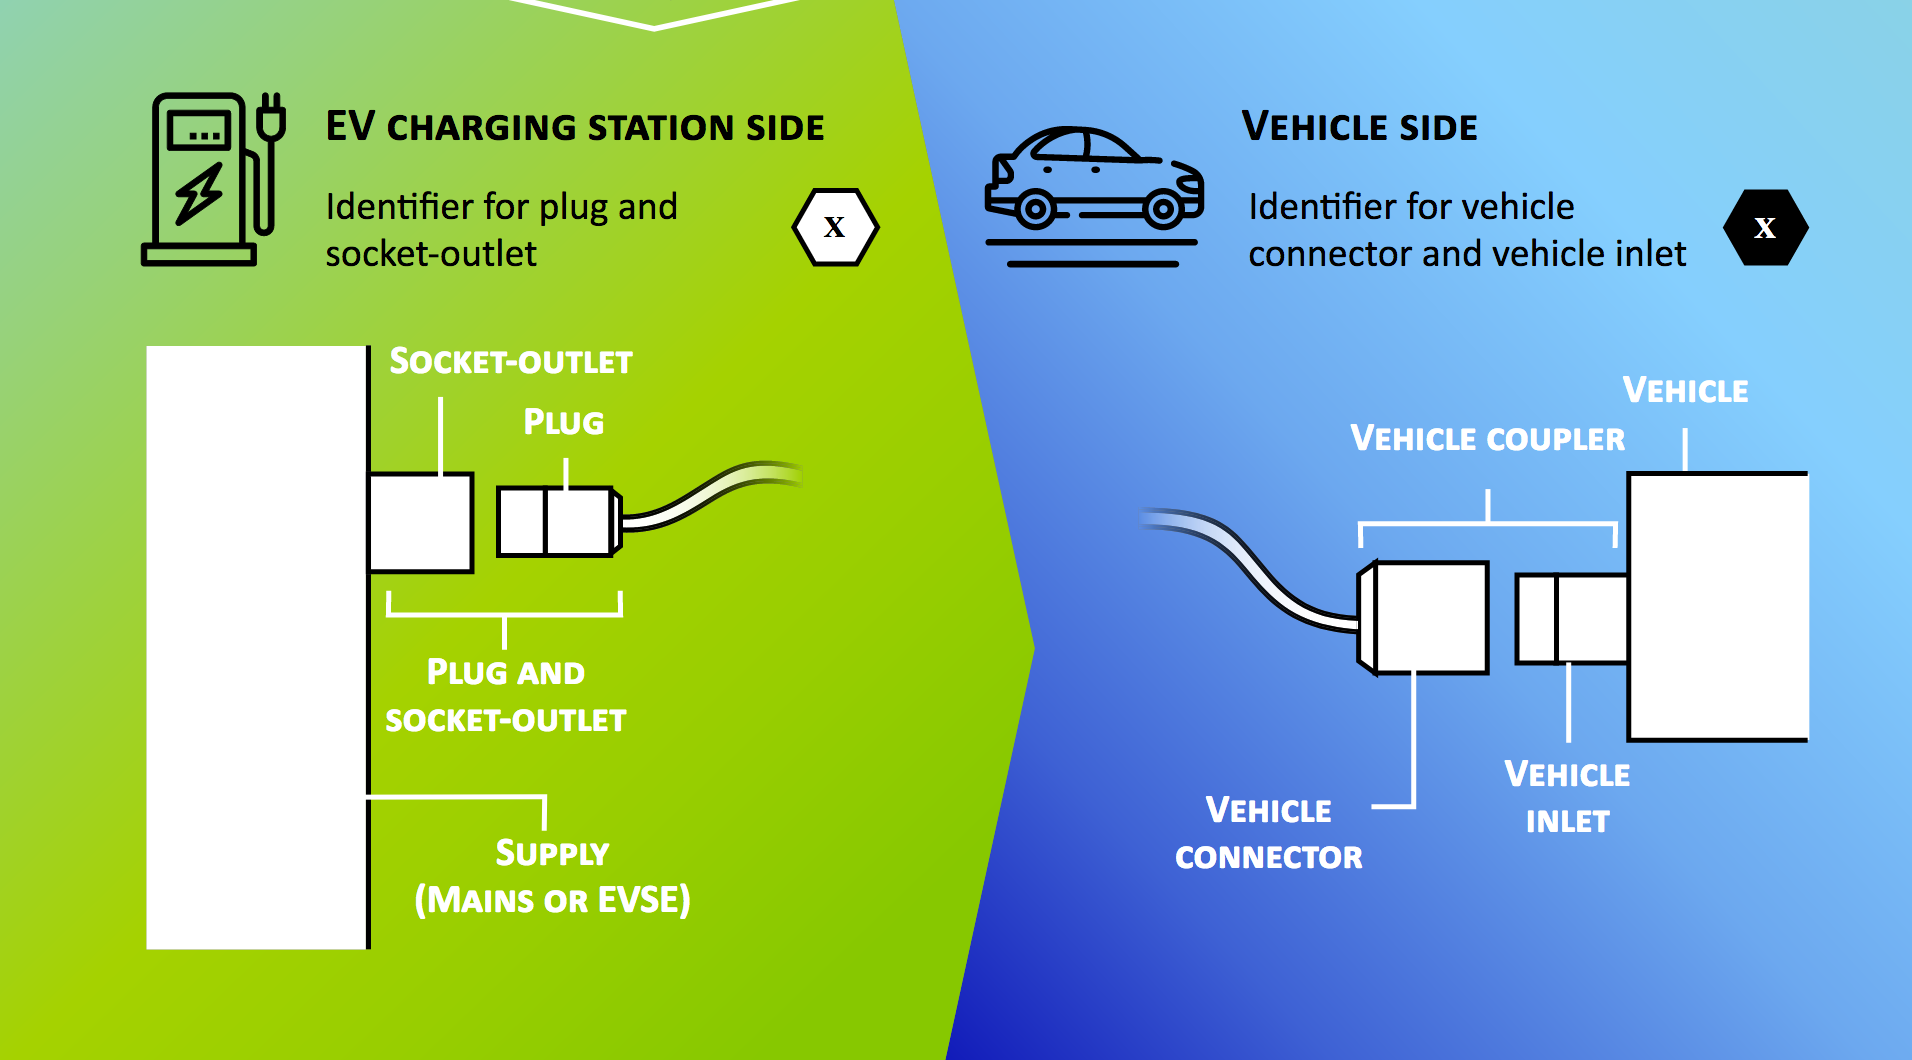 Standardized EU labels to help consumers recharging their EVs